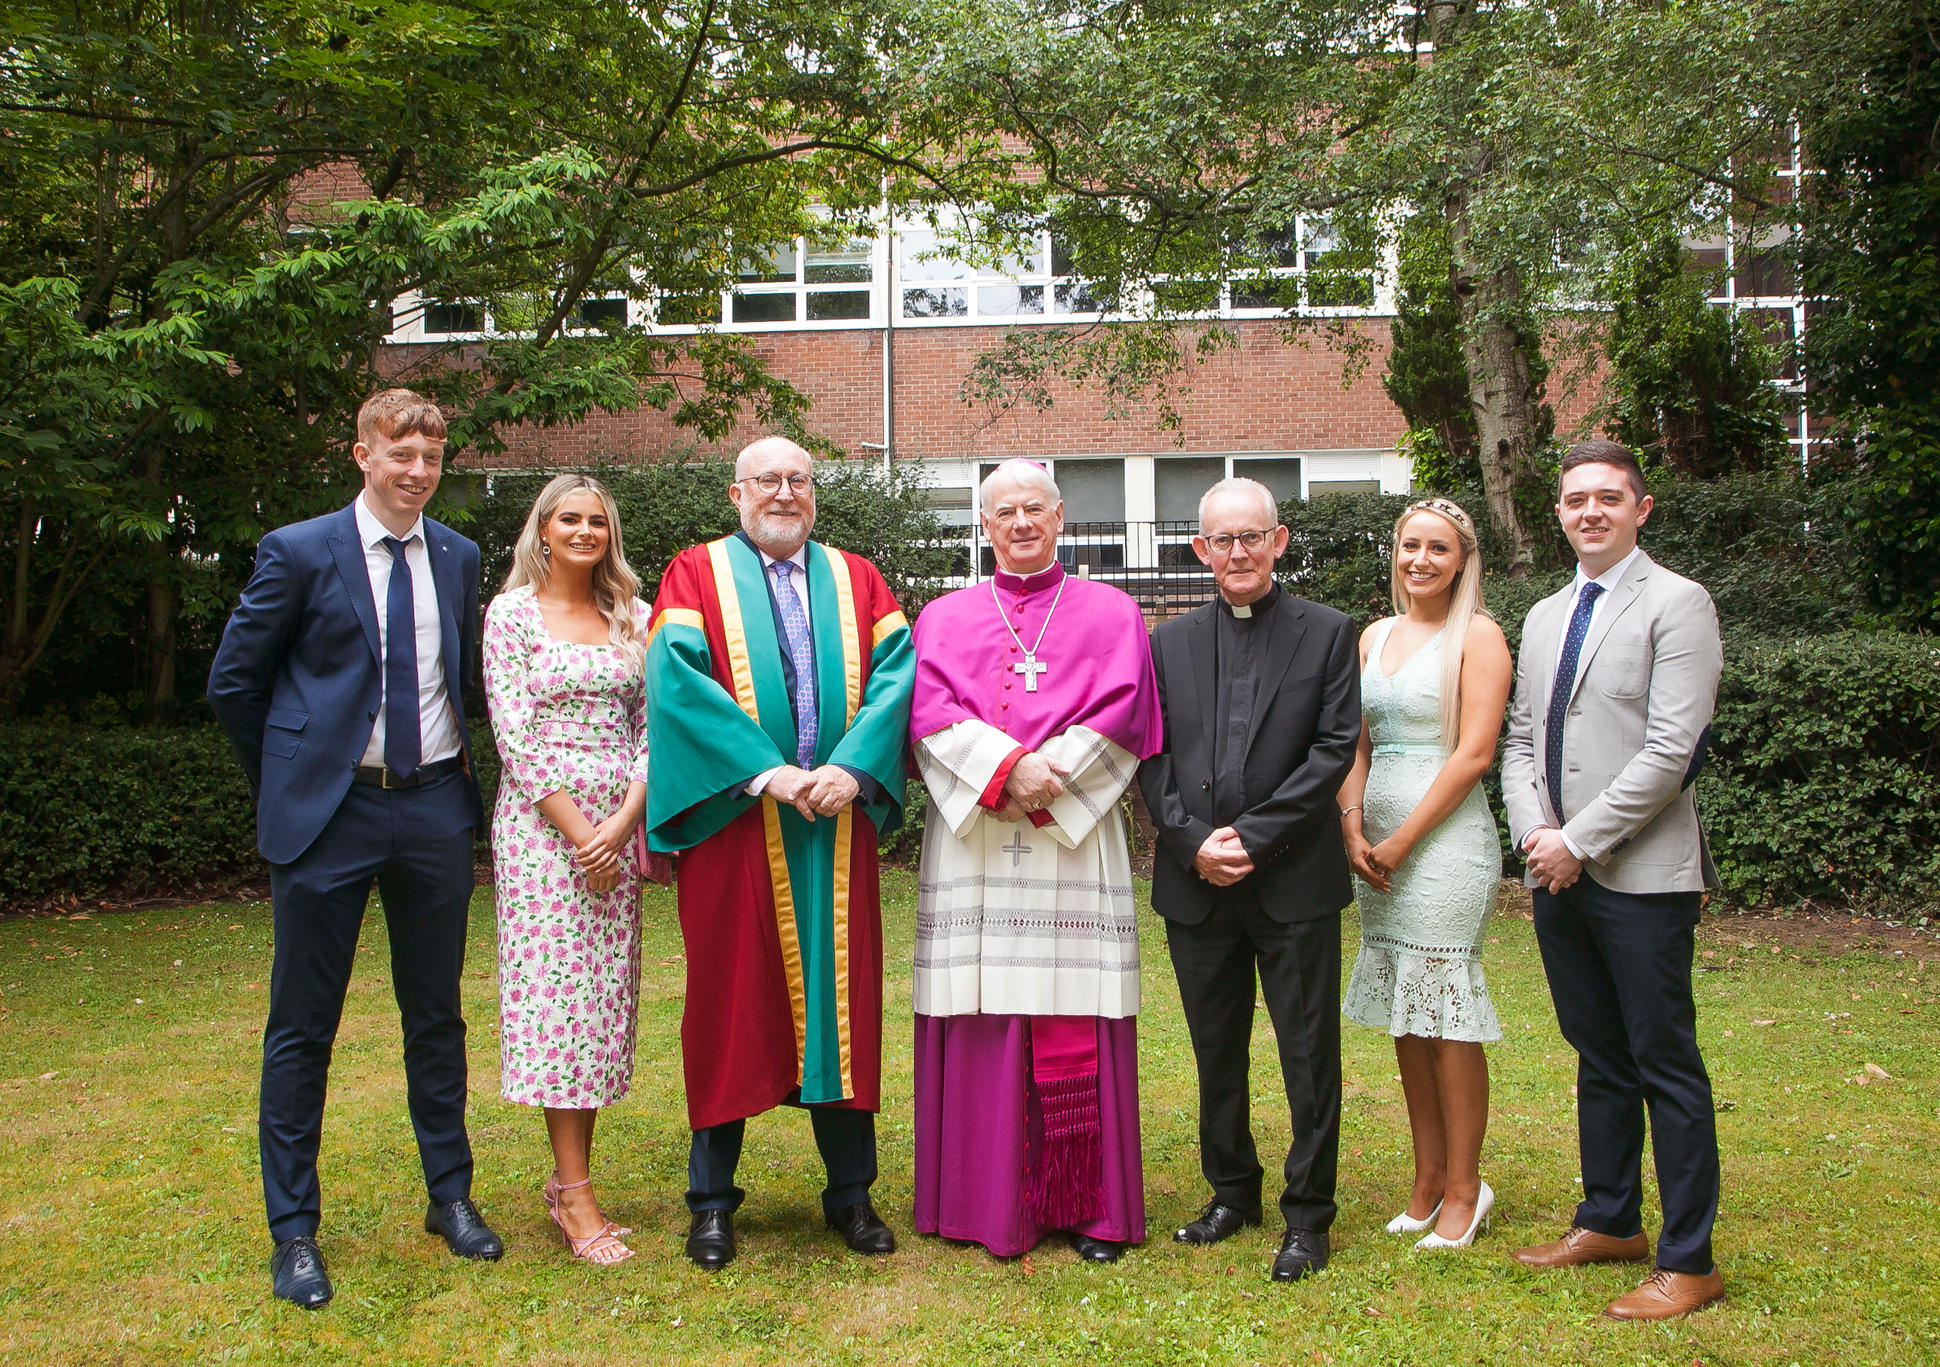 Jamie Duff; Aoife O’Hare; Professor Peter Finn, Principal; Most Rev Noel Treanor, Bishop of Down and Connor; Rev Dr Paul Fleming, Senior Tutor Staff and Resources; Emma McLaughlin; and Paul Boggs